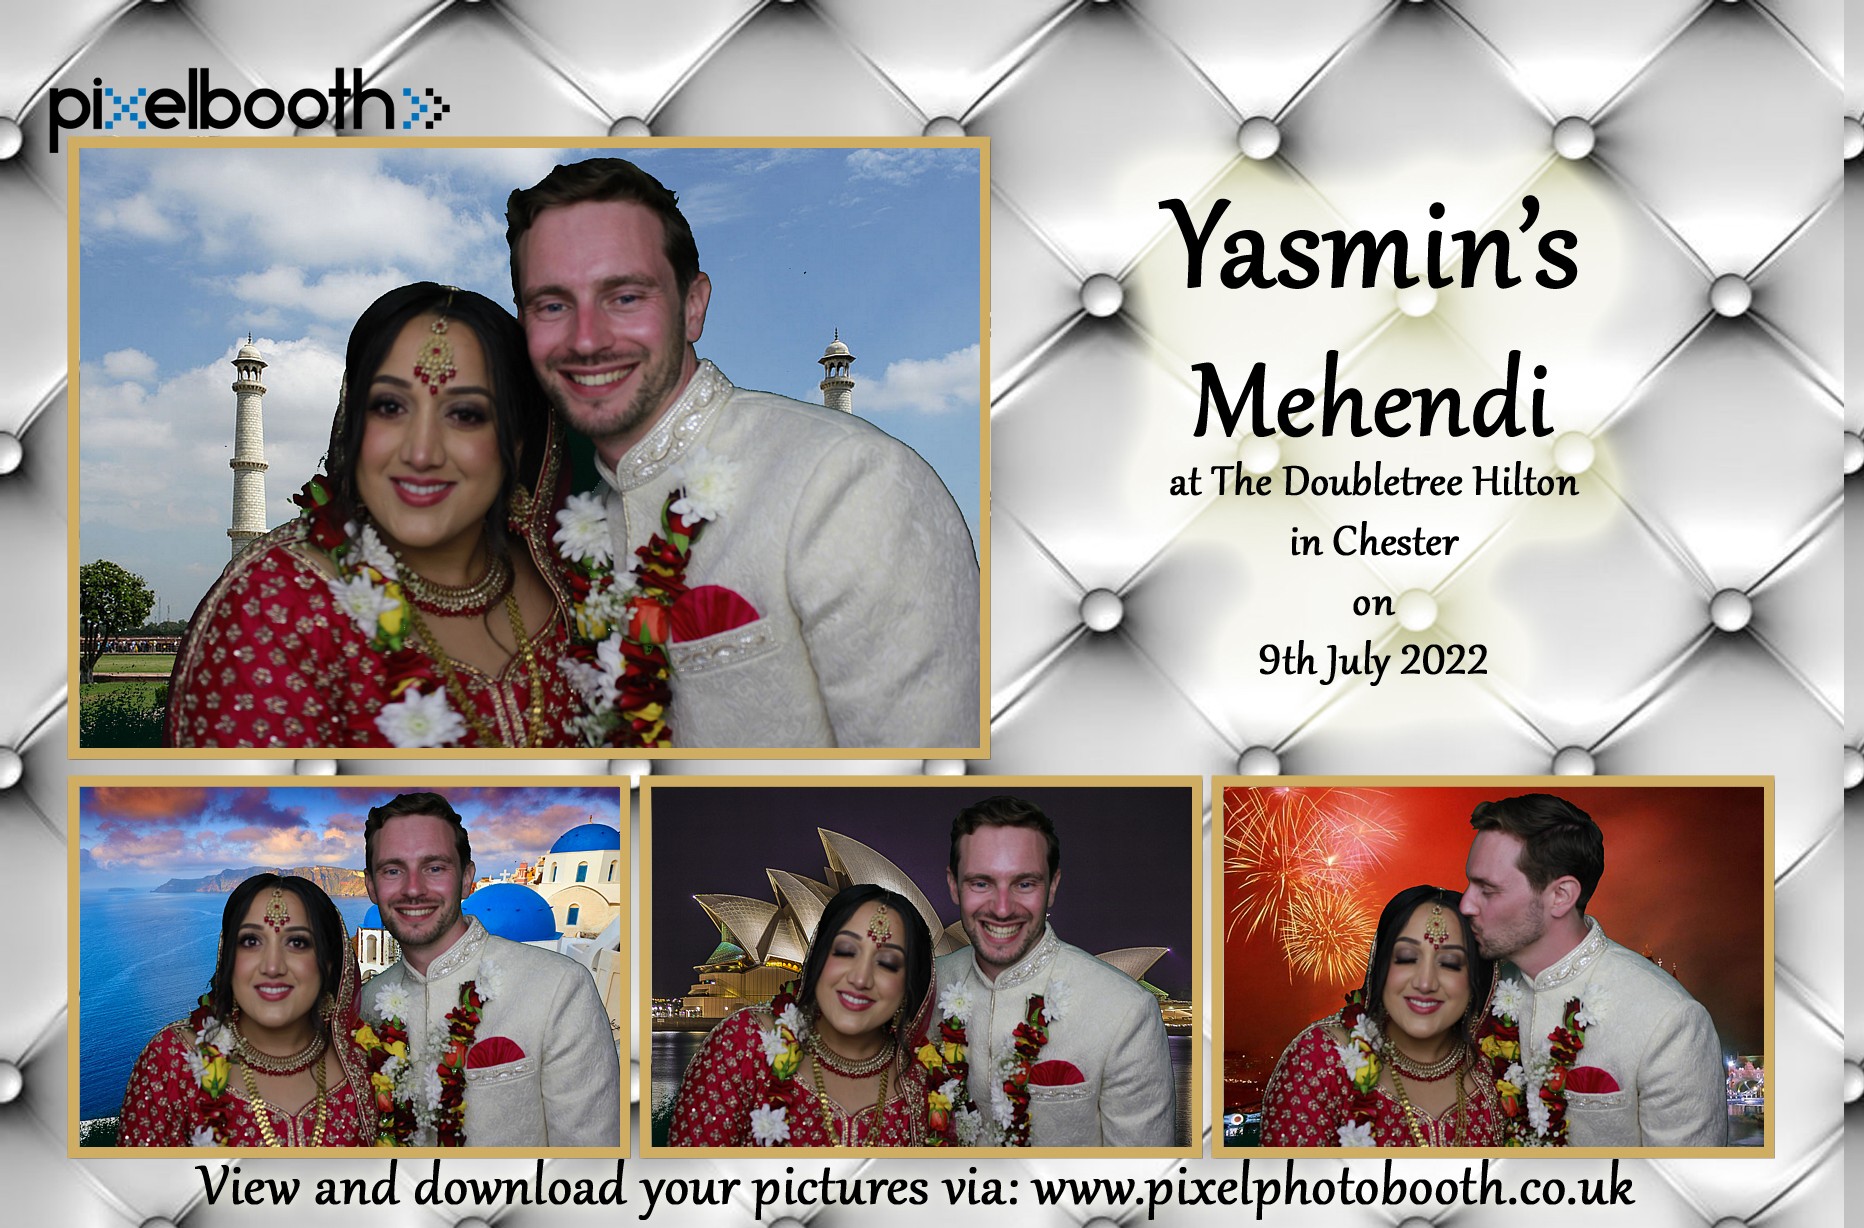 9th July 2022: Yasmin's Mehendi at The Doubletree Hilton, Chester